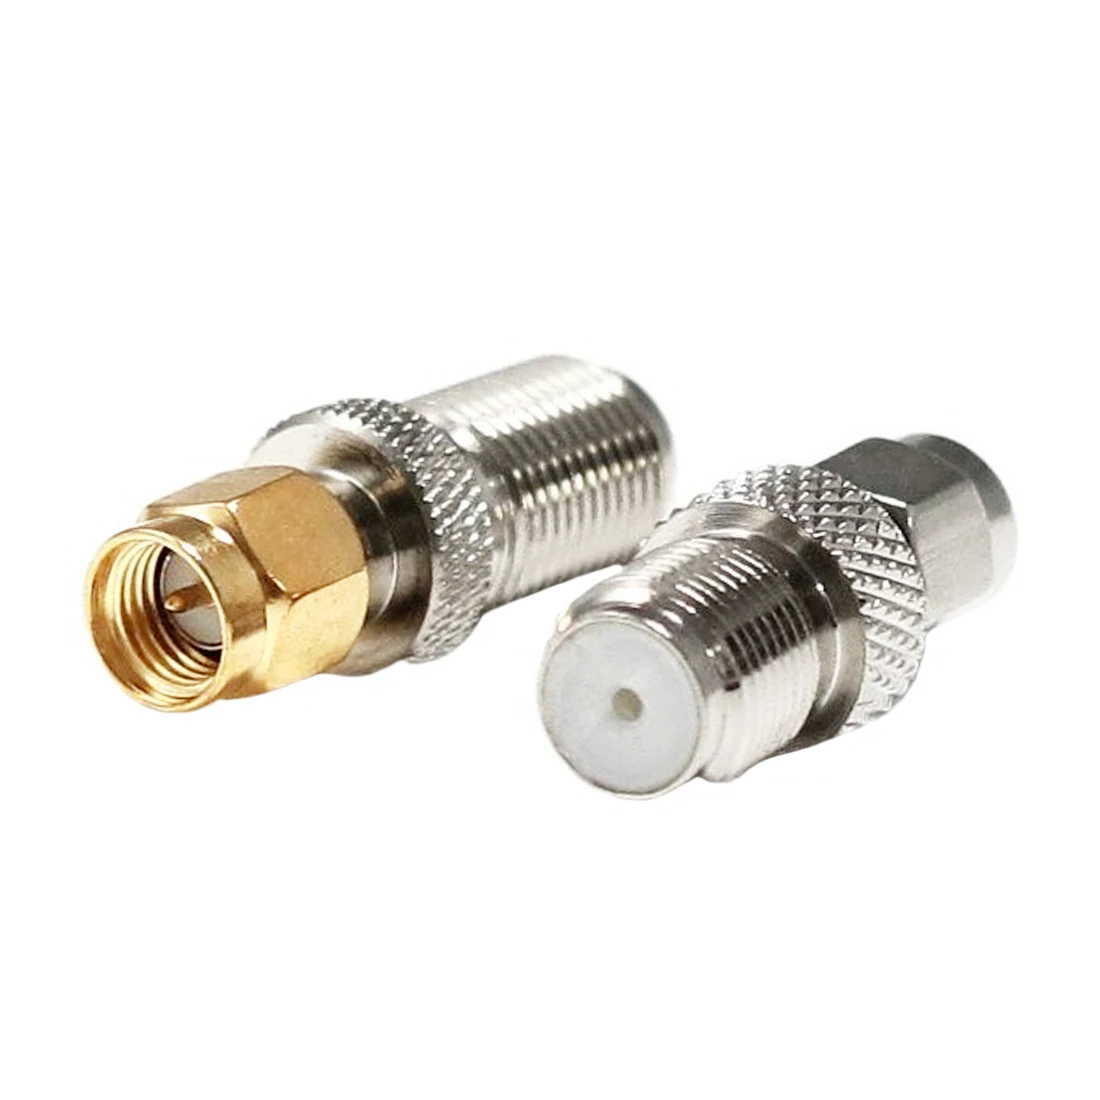 1pc SMA Male to F Female RF Coax Adapter Connector Straight Type Wholesale New